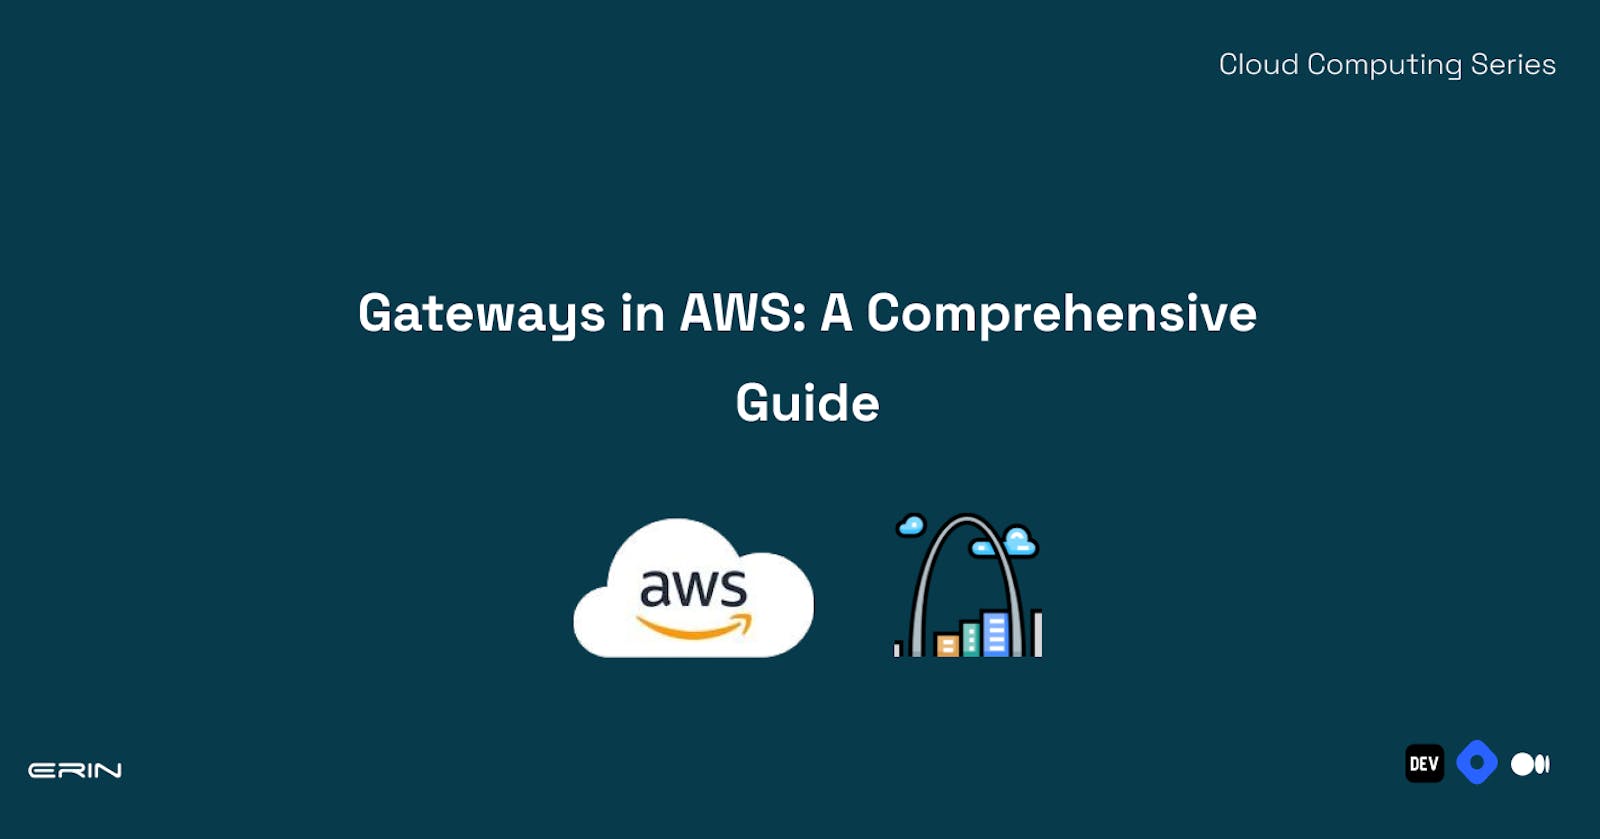 Gateways in AWS: A Comprehensive Guide